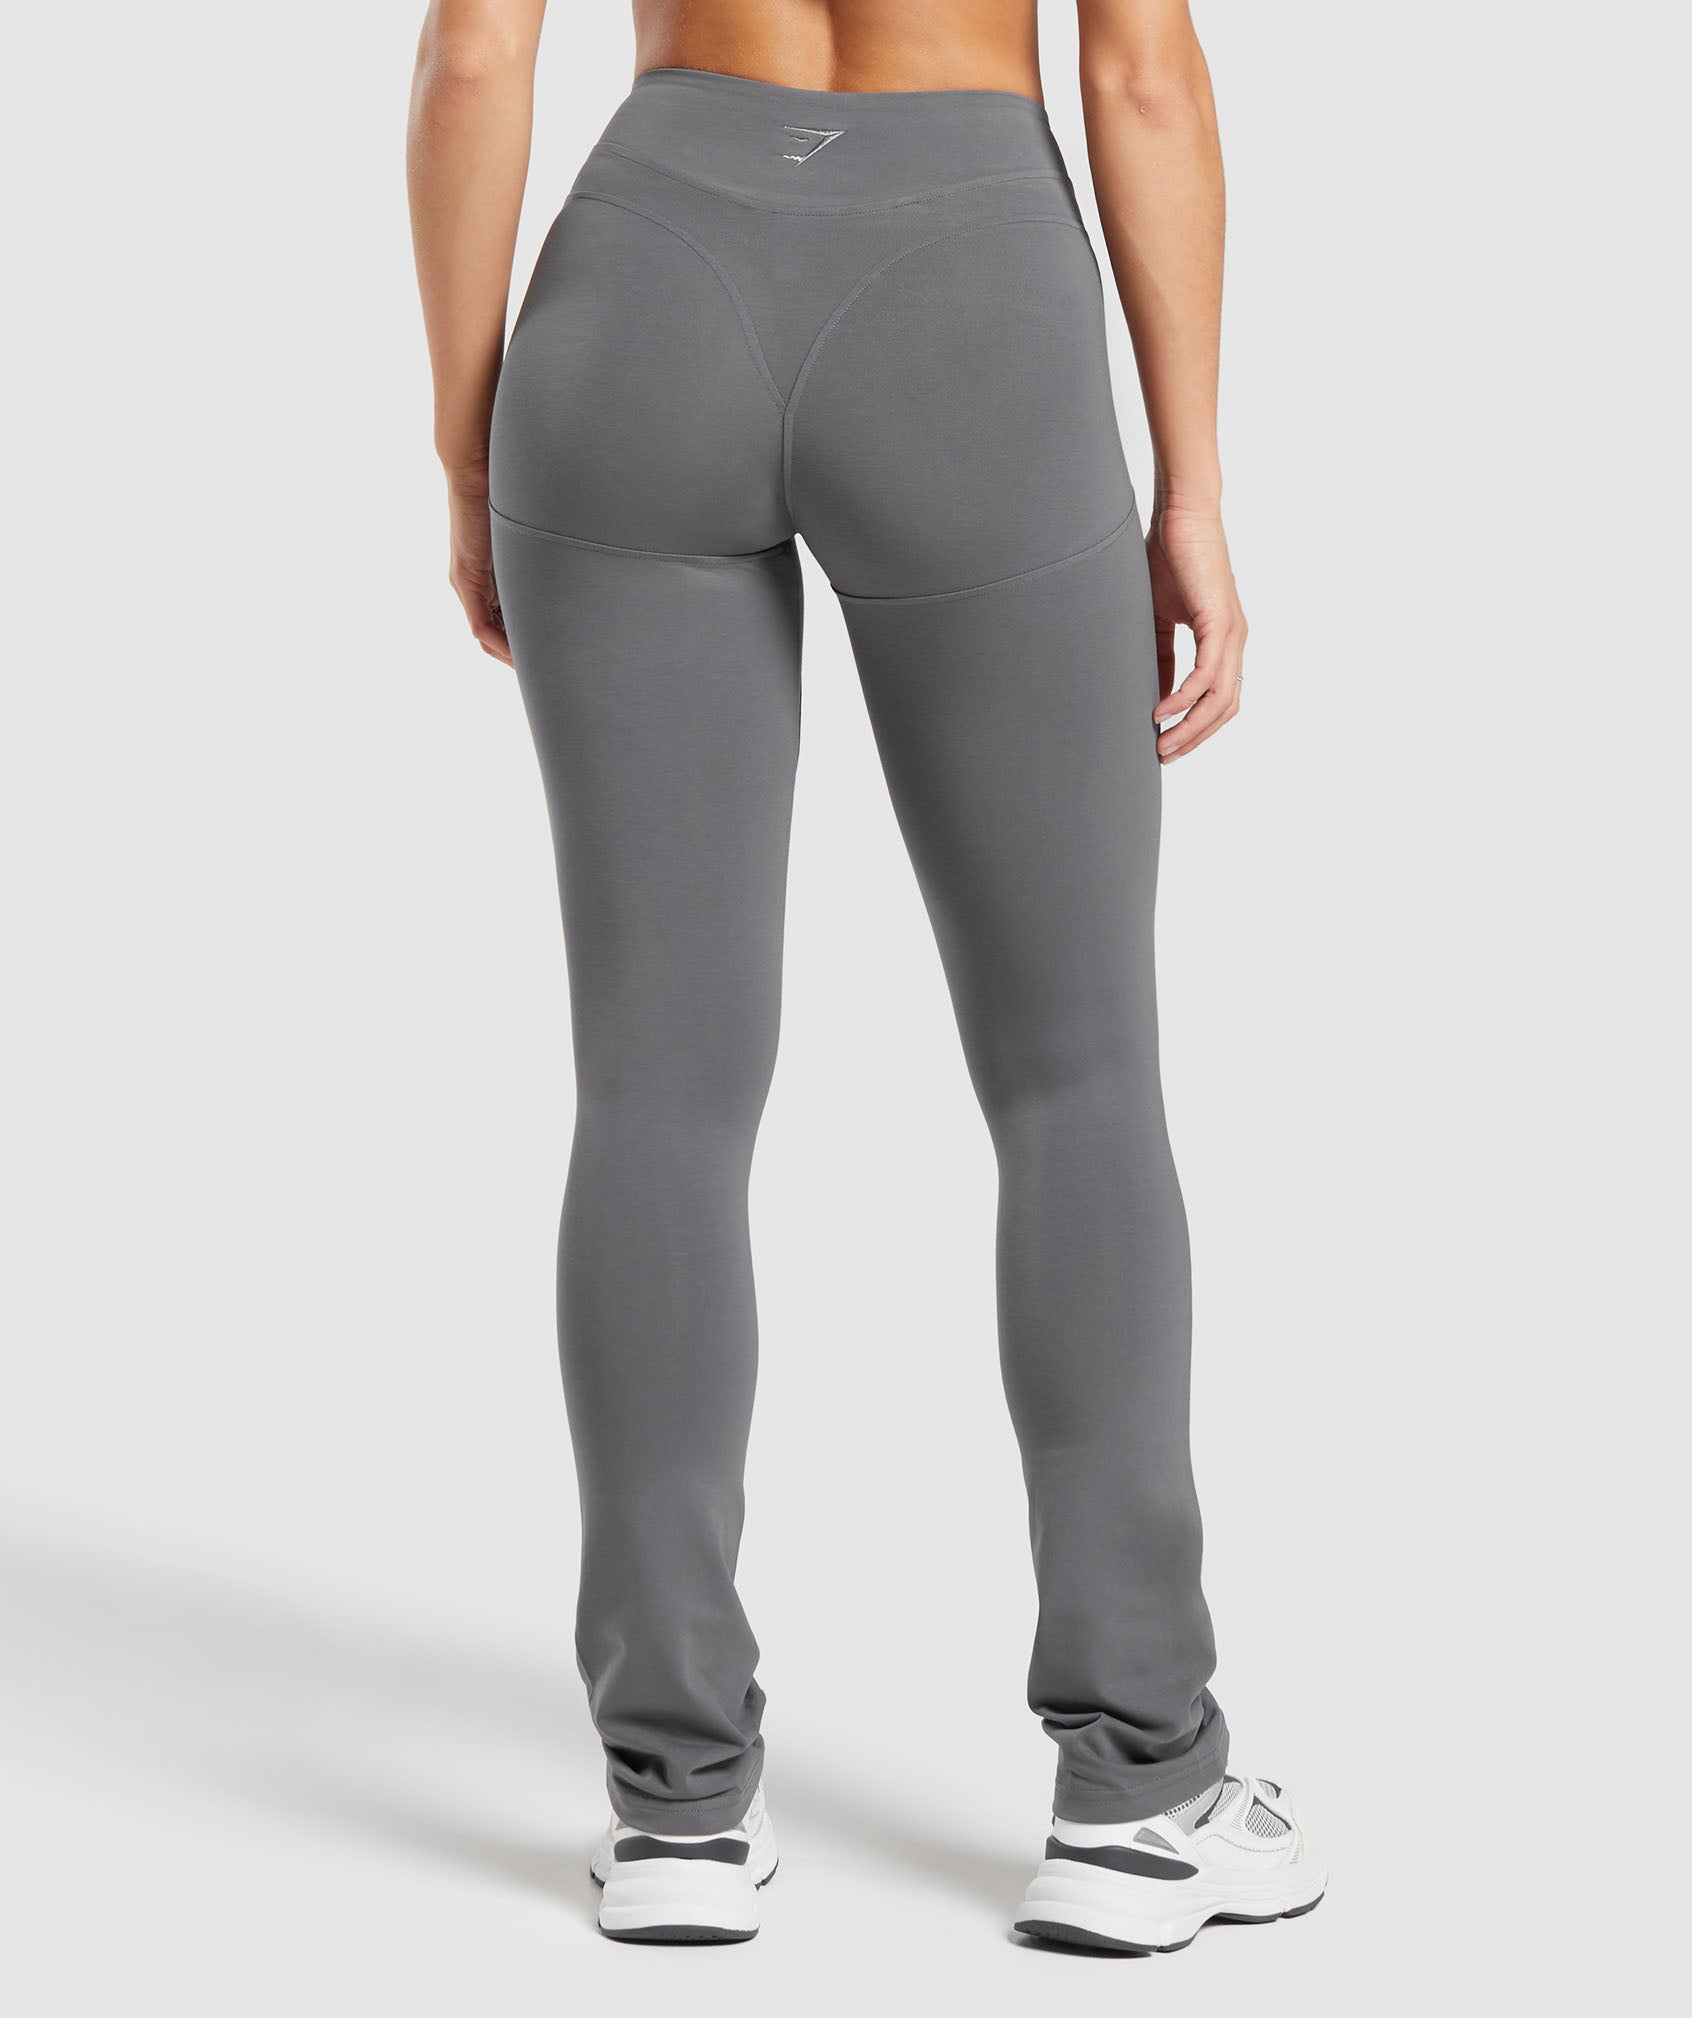 Rest Day Boot Cut Cotton Leggings in Brushed Grey - view 2